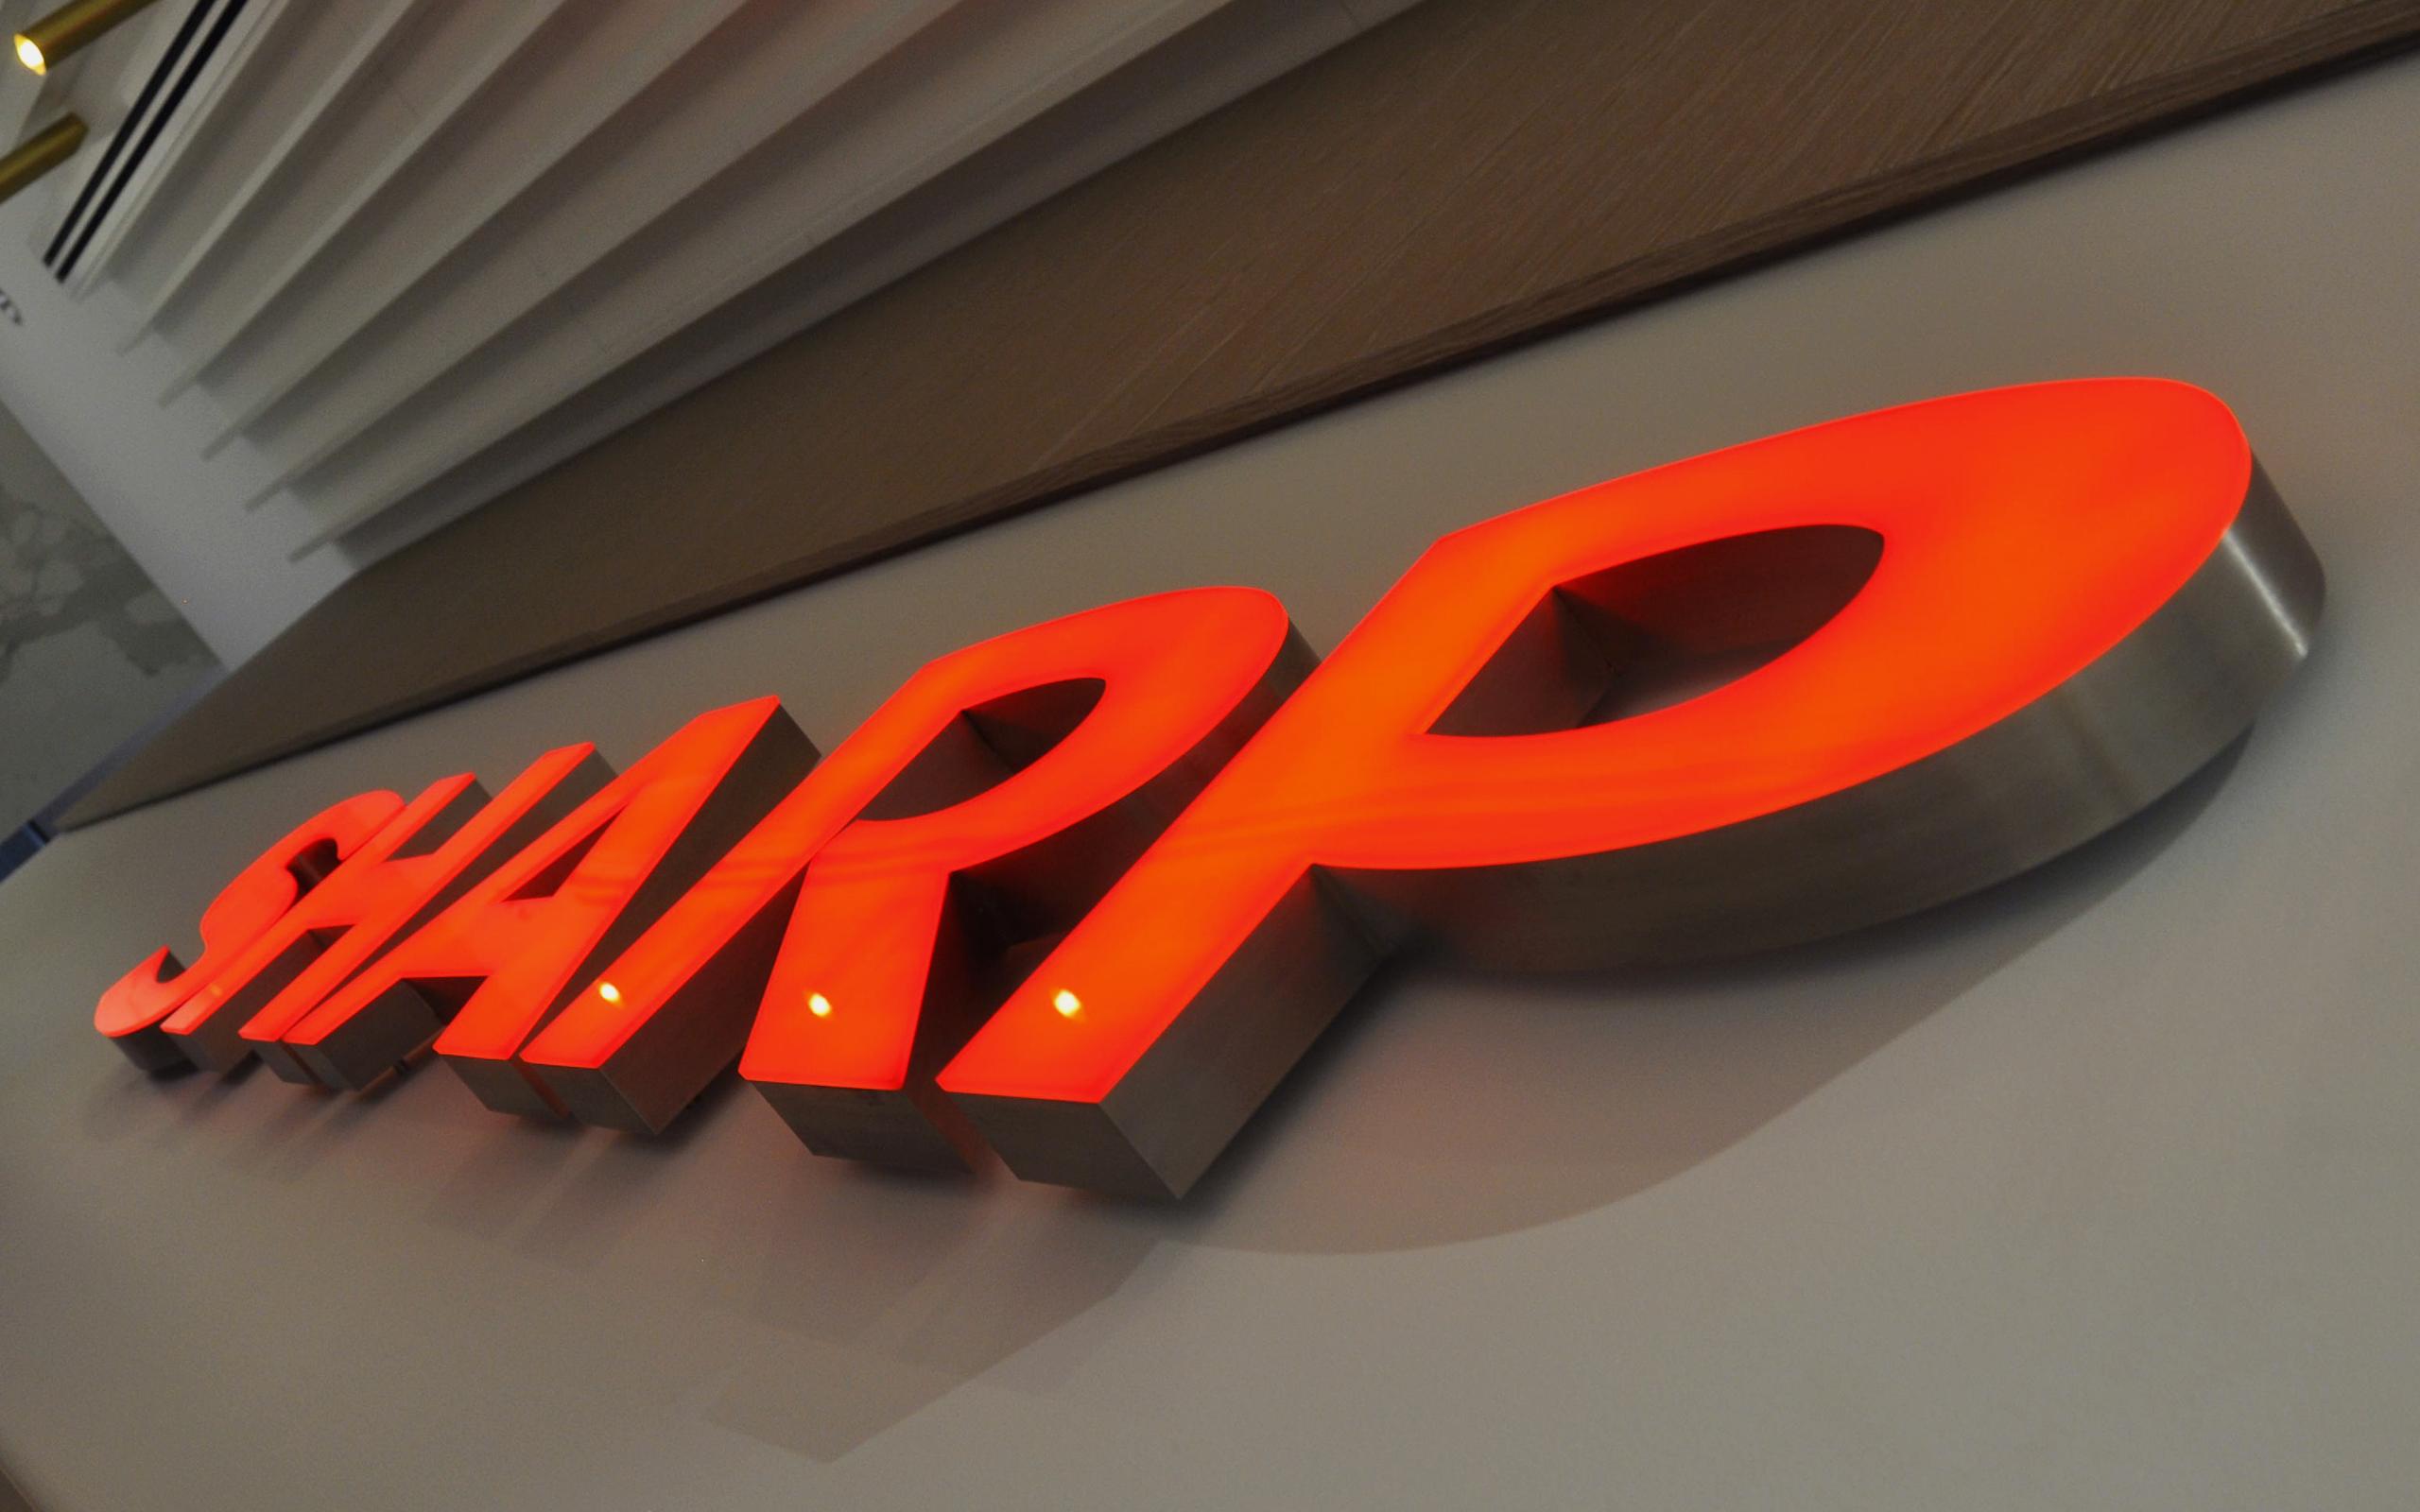 sharp logo illuminated indivual letters with raised faces